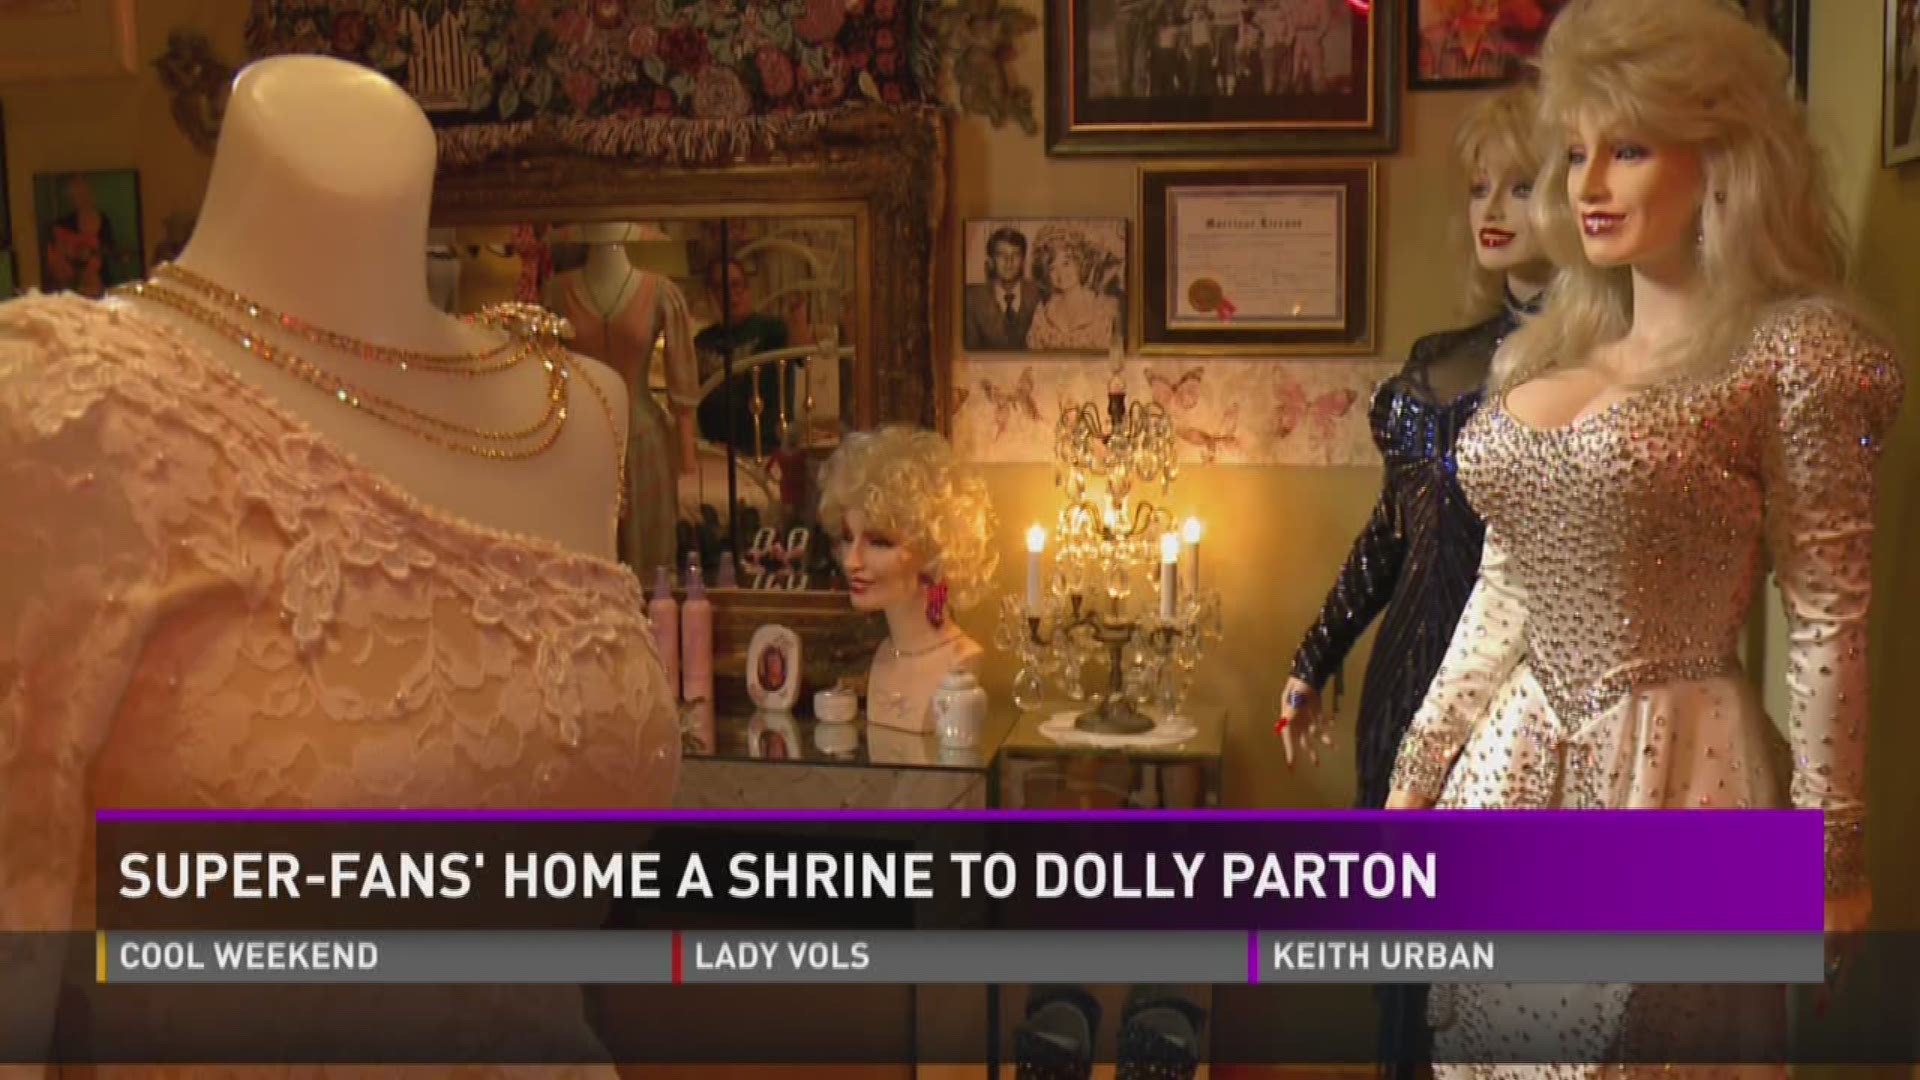 Feb. 2, 2017: Out of millions of Dolly Parton fans around the world, two of the biggest may live in Pigeon Forge.